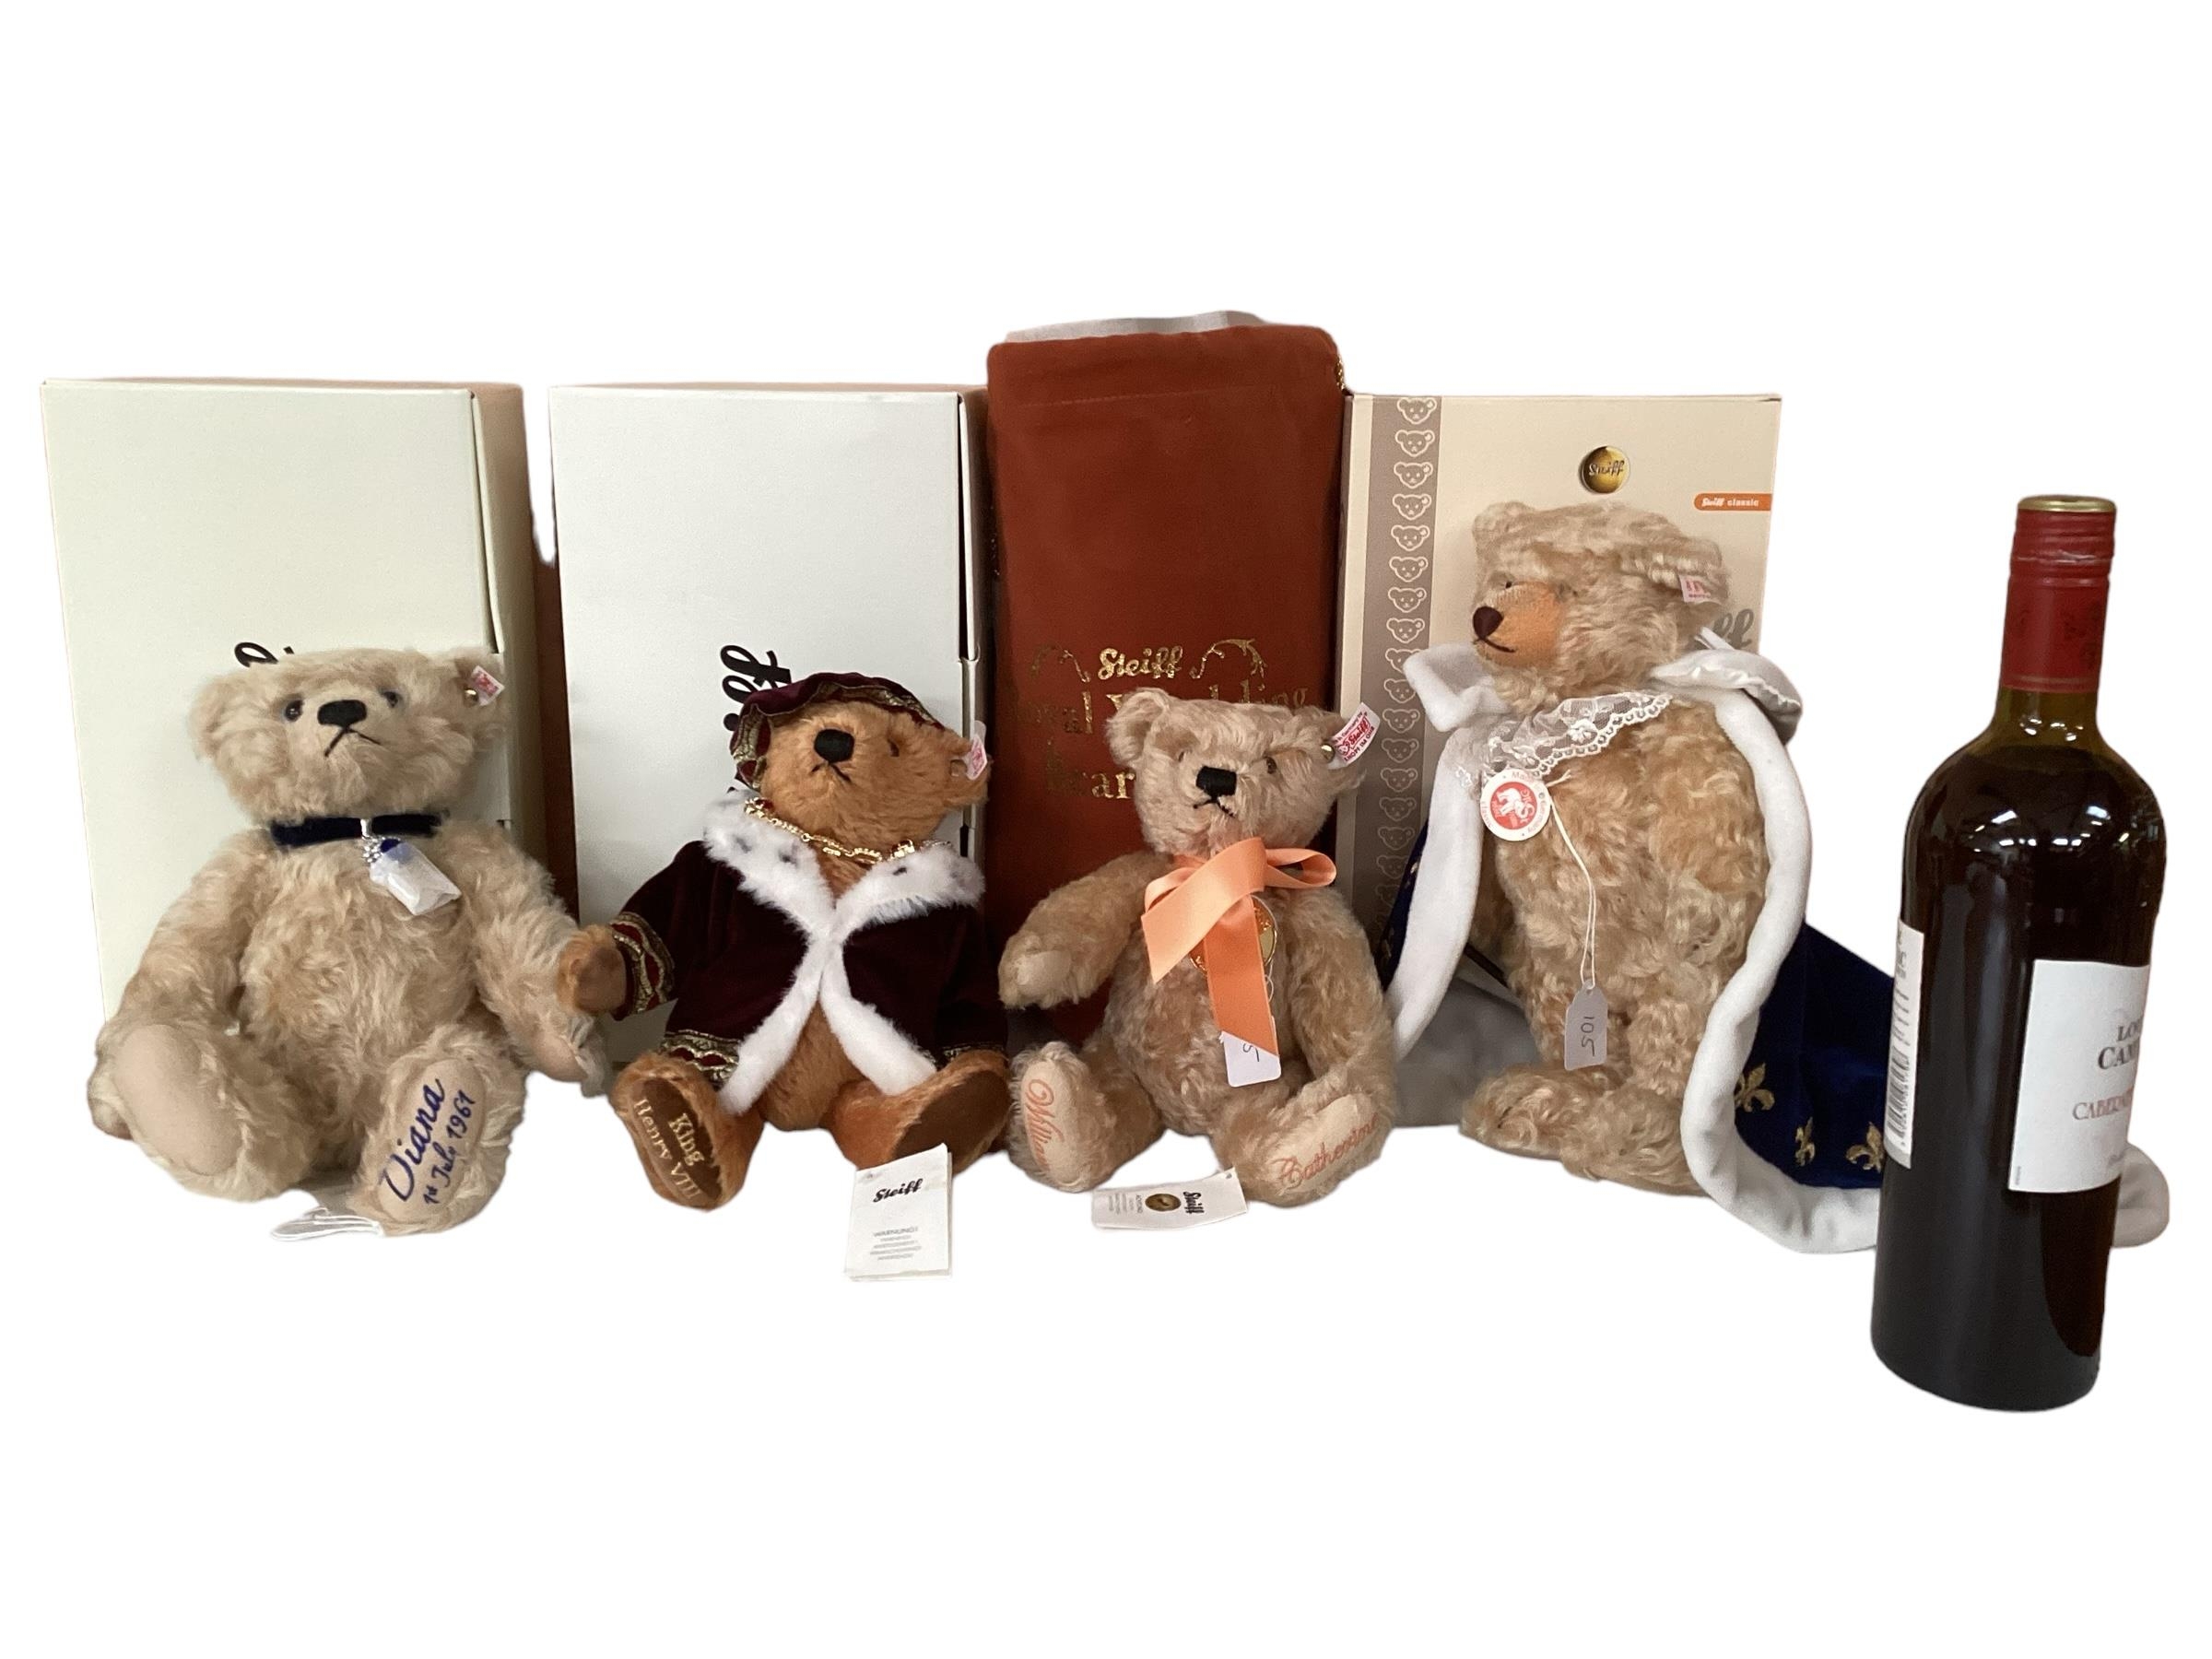 Four Steiff Bears with a Royal theme, all boxed, all limited, all certificates, in condition as new, - Image 20 of 20